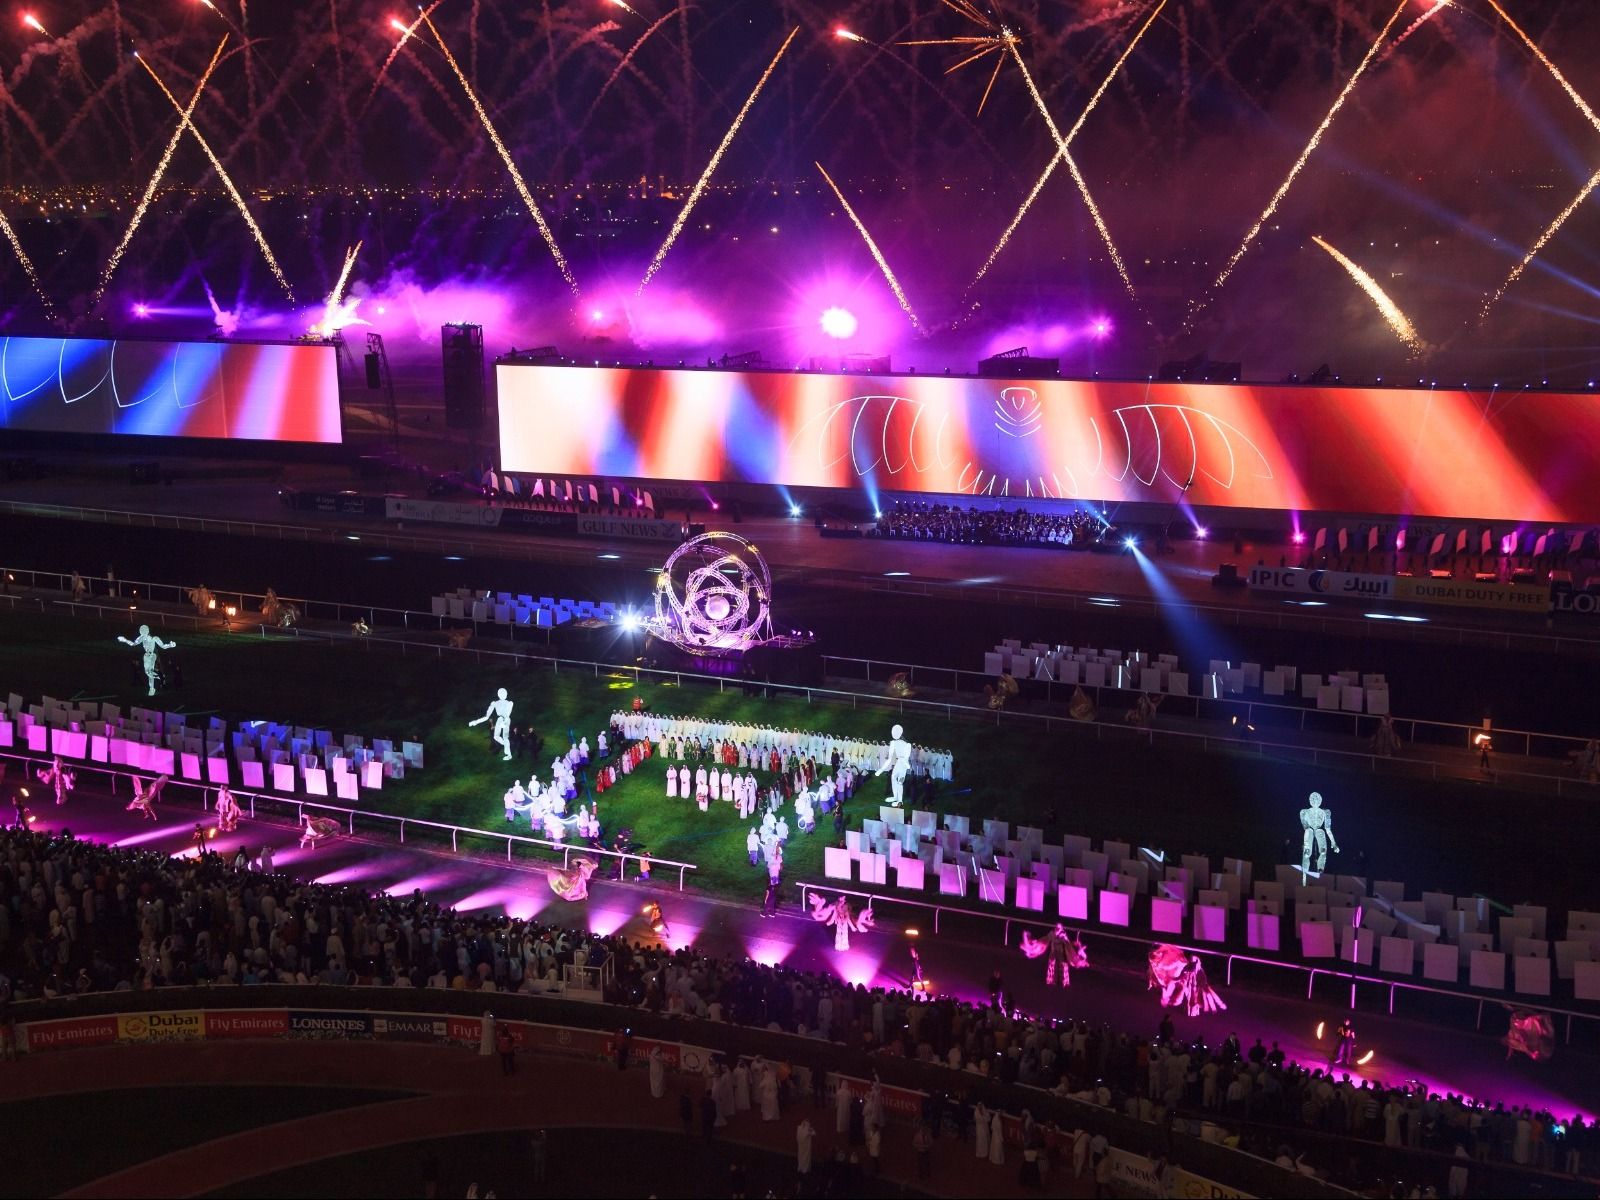 Curating And Broadcasting Compelling Opening And Closing Ceremonies For The Dubai World Cup 8128